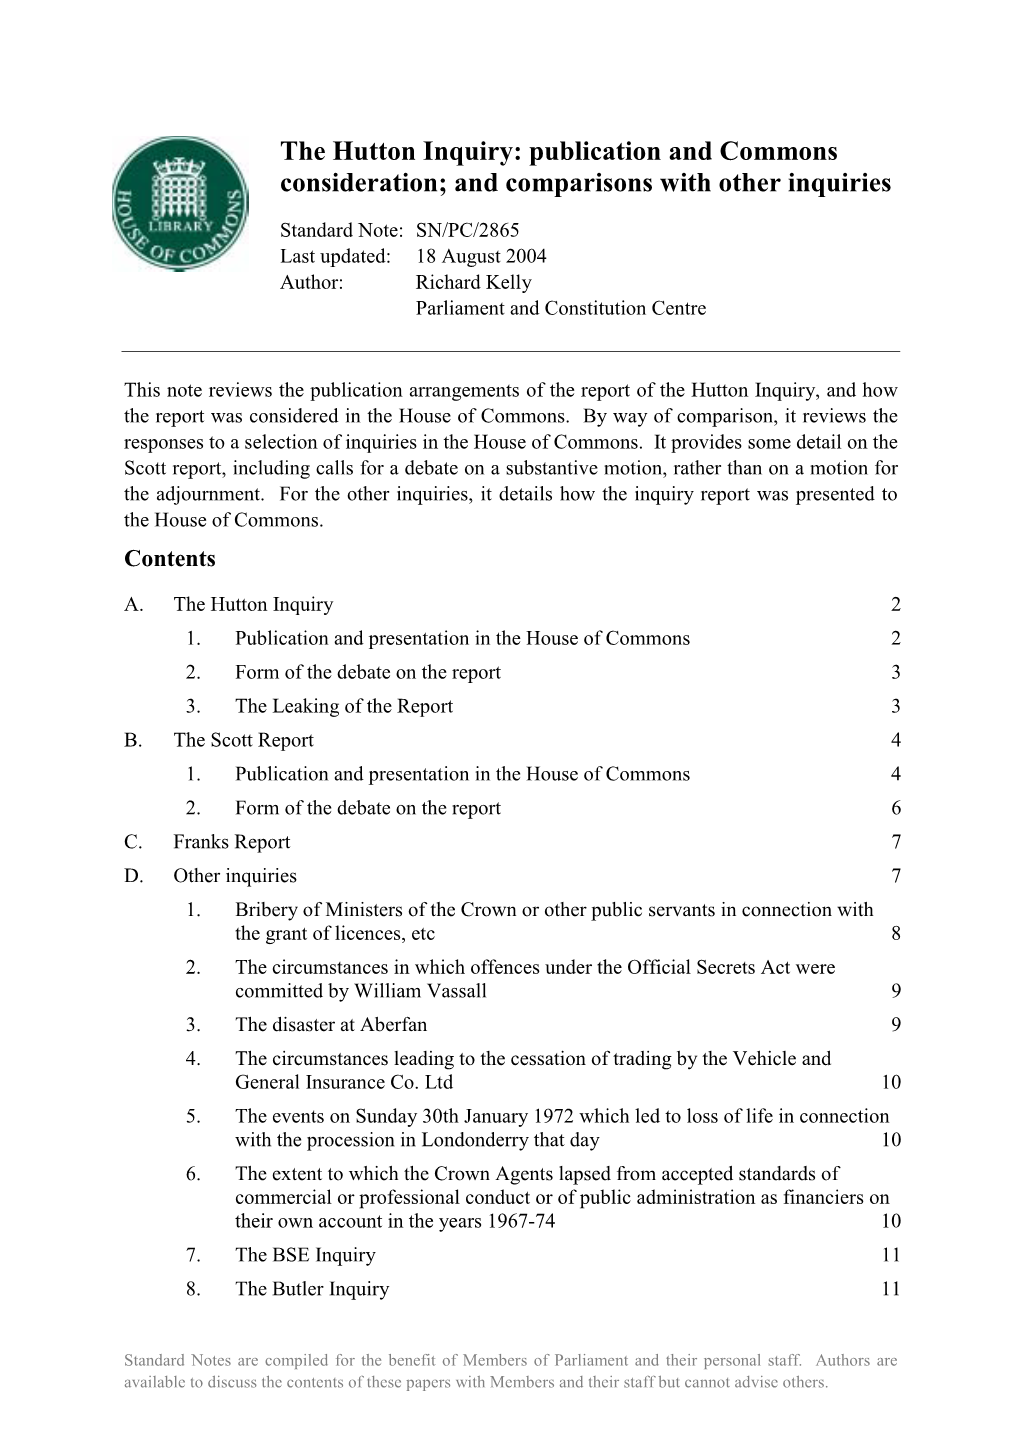 The Hutton Inquiry: Publication and Commons Consideration; and Comparisons with Other Inquiries